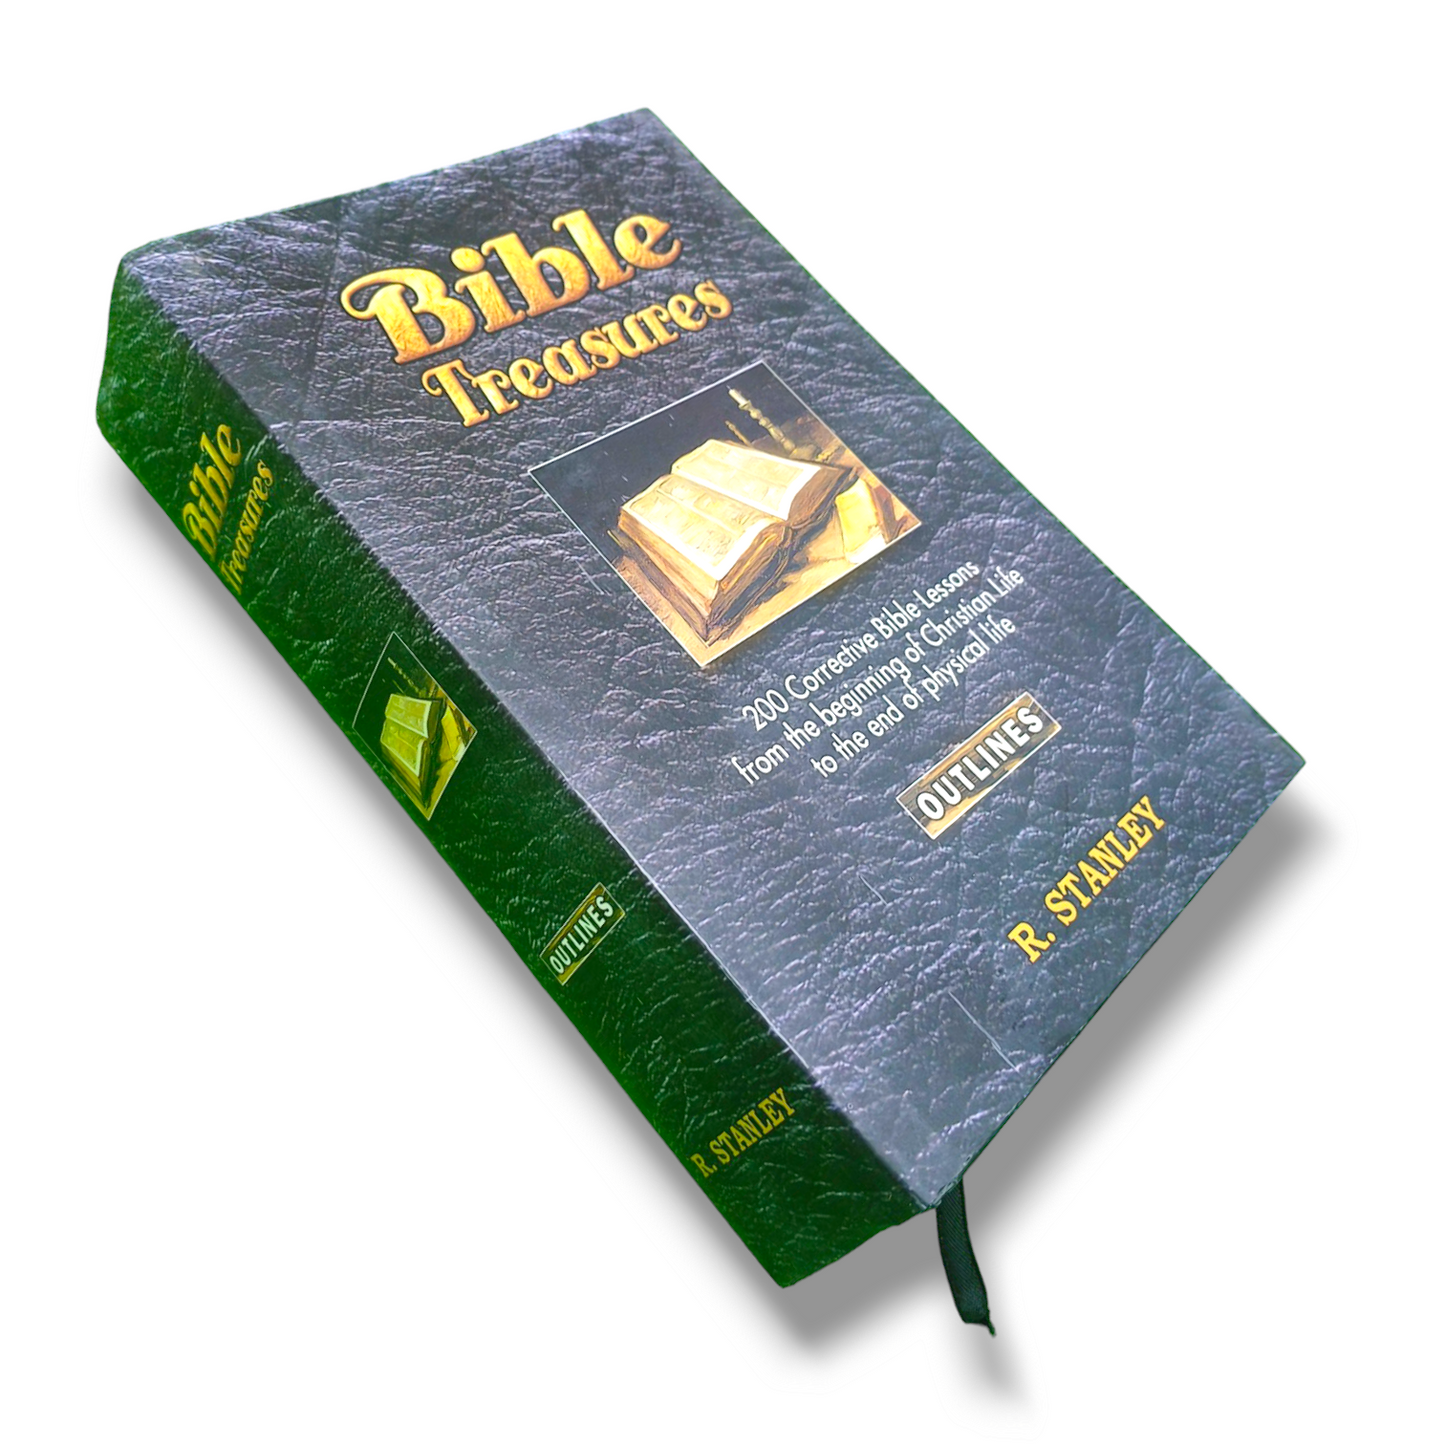 Bible Treasures Out line Book | Large Print Edition | Hard Bound | Gospel Book | New Edition